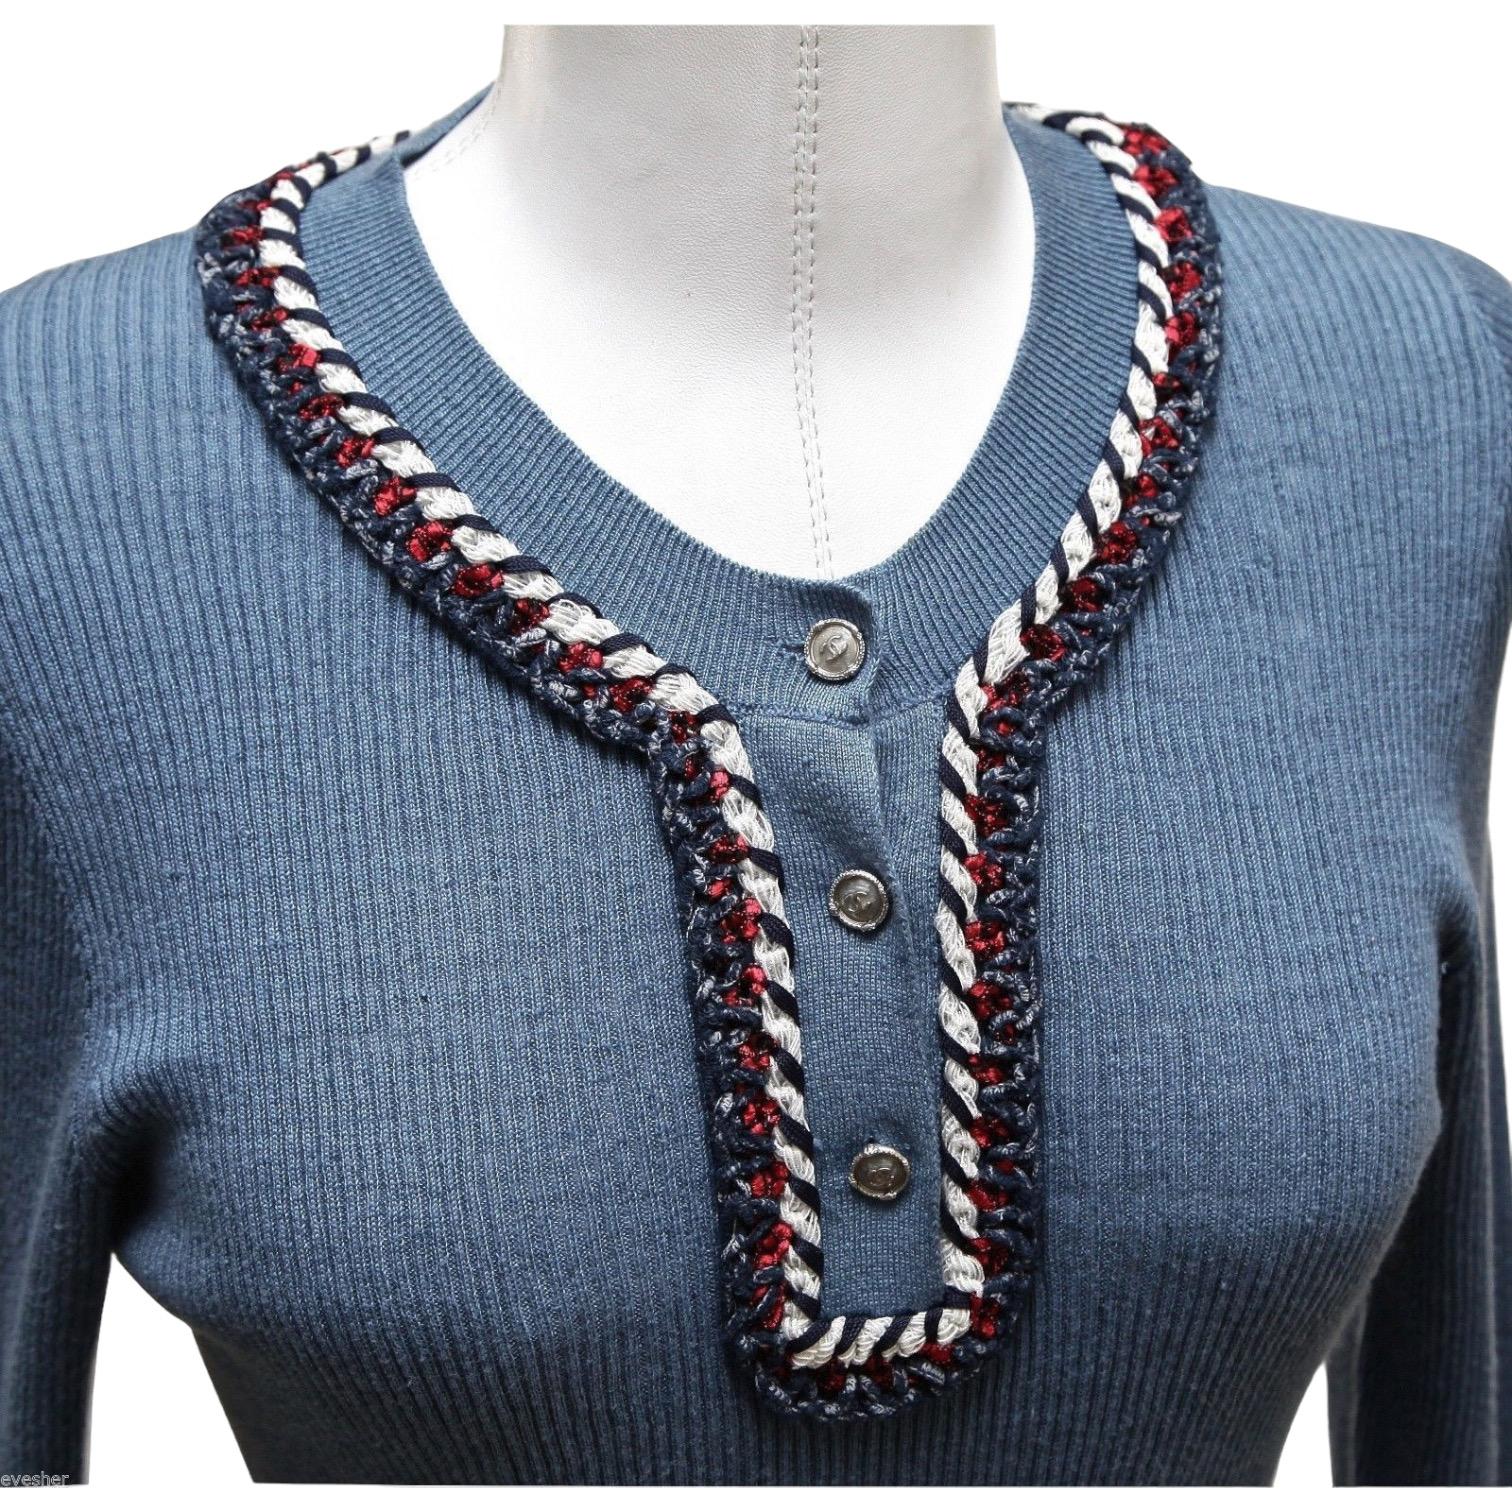 Gray CHANEL Knit Sweater Top Long Sleeve Navy Red White Blue Silver HW 40 13C 2013 For Sale